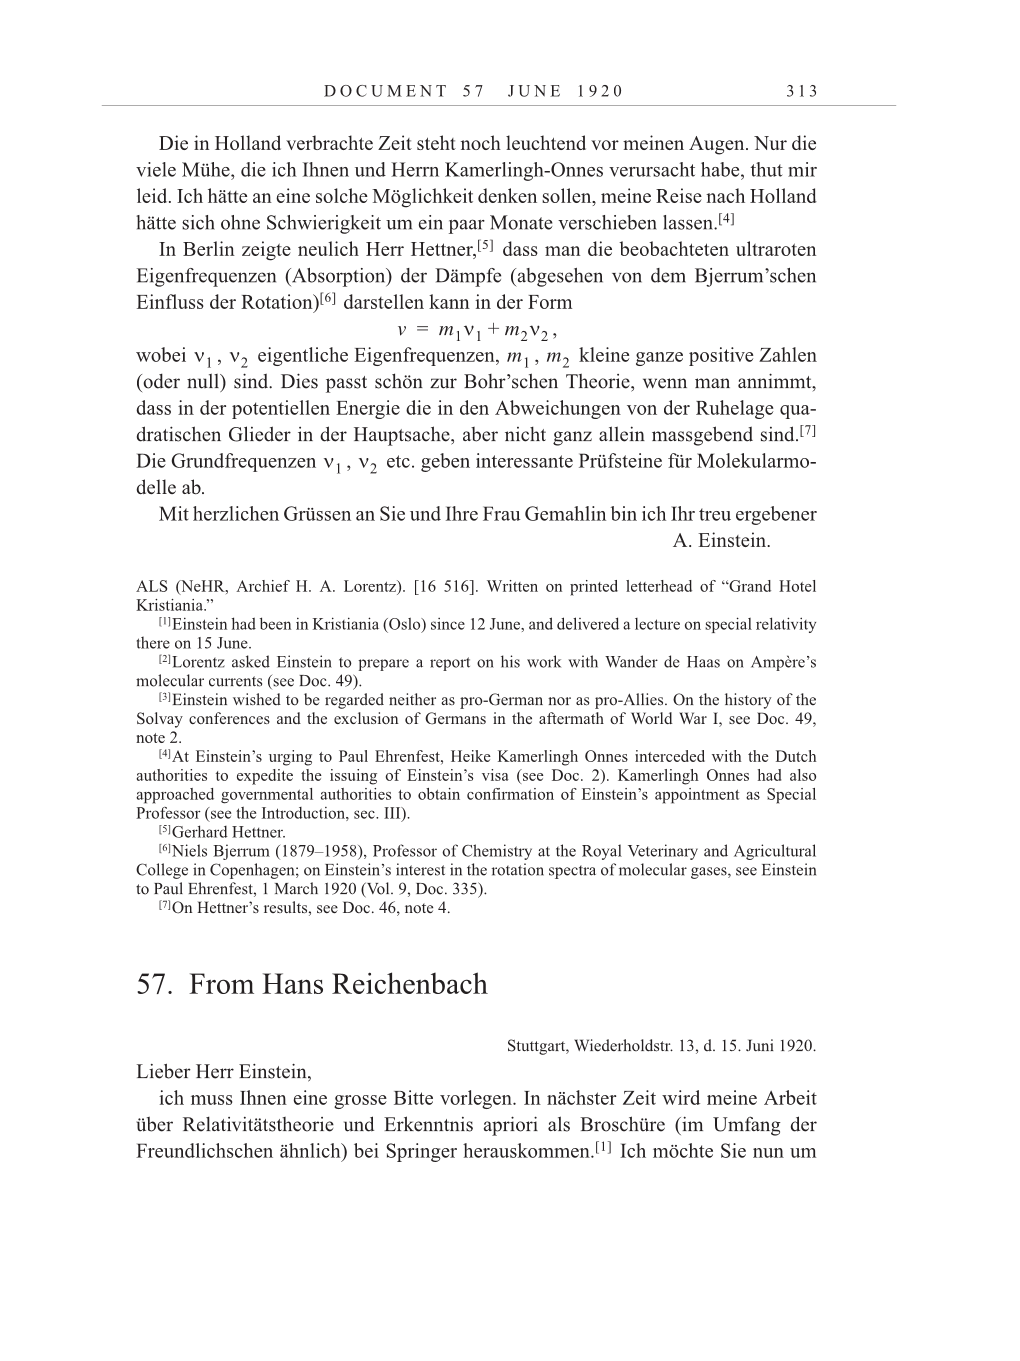 Volume 10: The Berlin Years: Correspondence May-December 1920 / Supplementary Correspondence 1909-1920 page 313